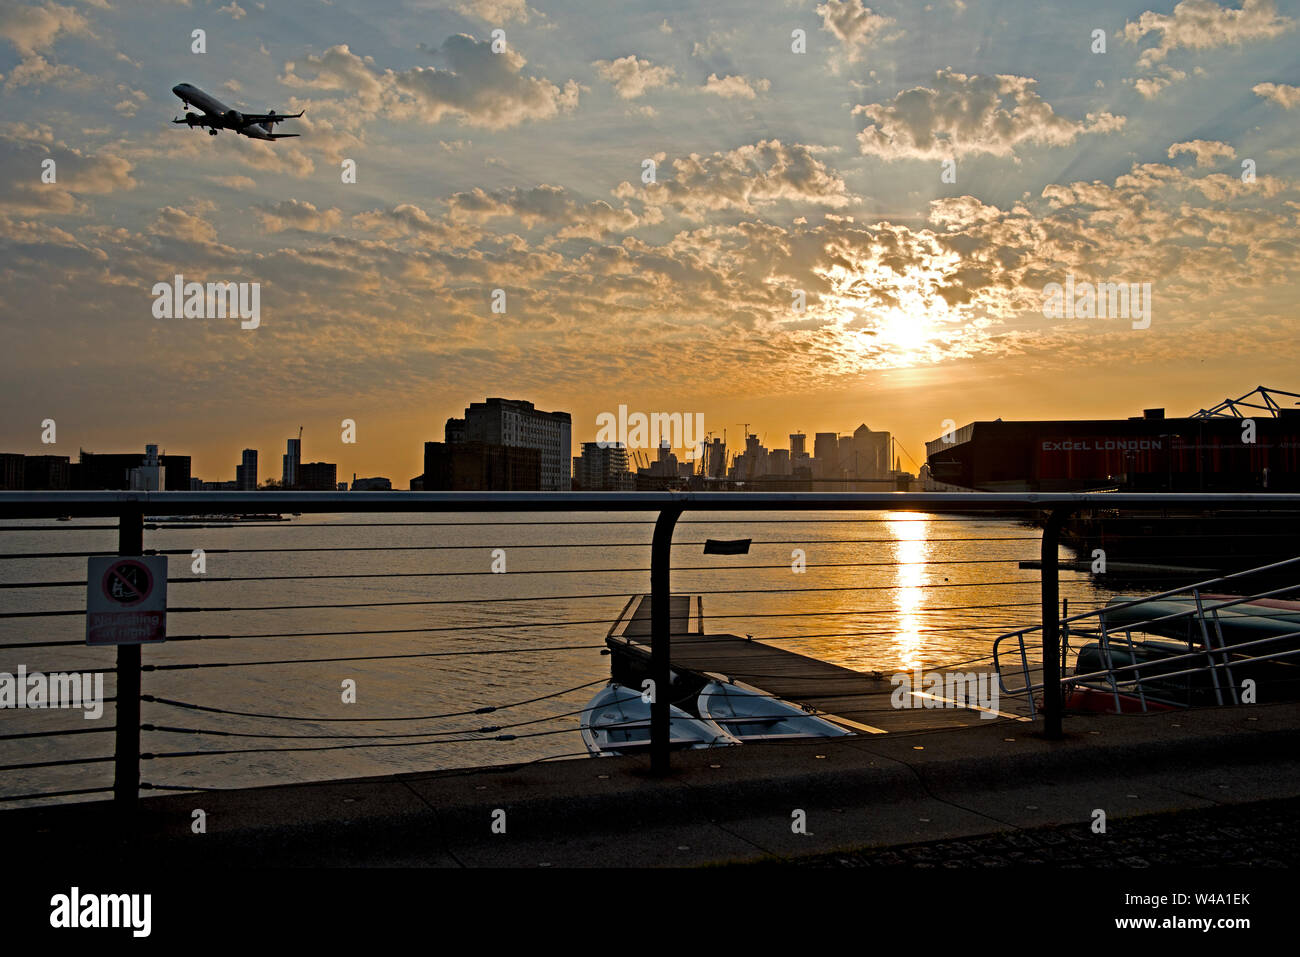 Sunset over the Emirate Royal Docks. Looking west from Connaught Bridge towards central London. An aircraft on final approach th London City Airport Stock Photo